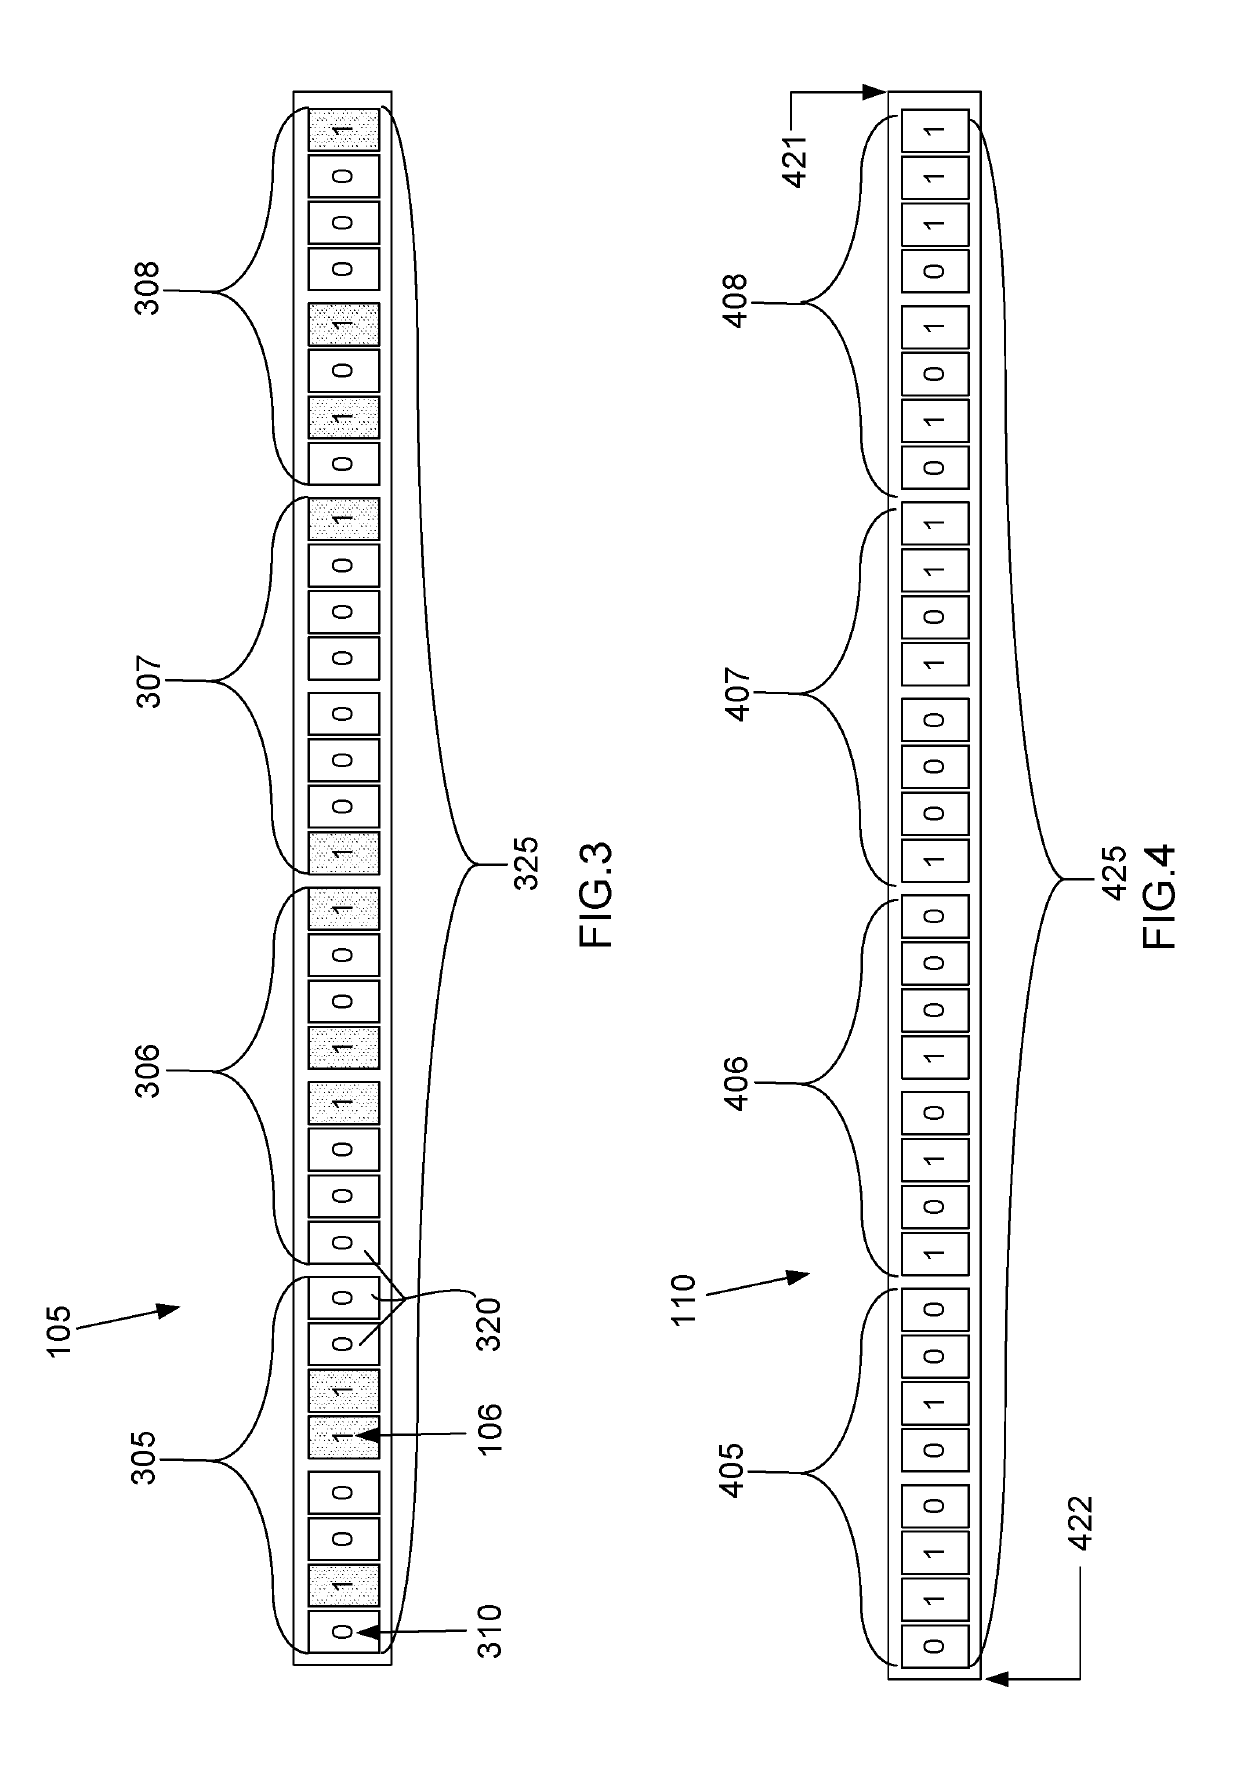 Instrumentation privacy apparatus and method